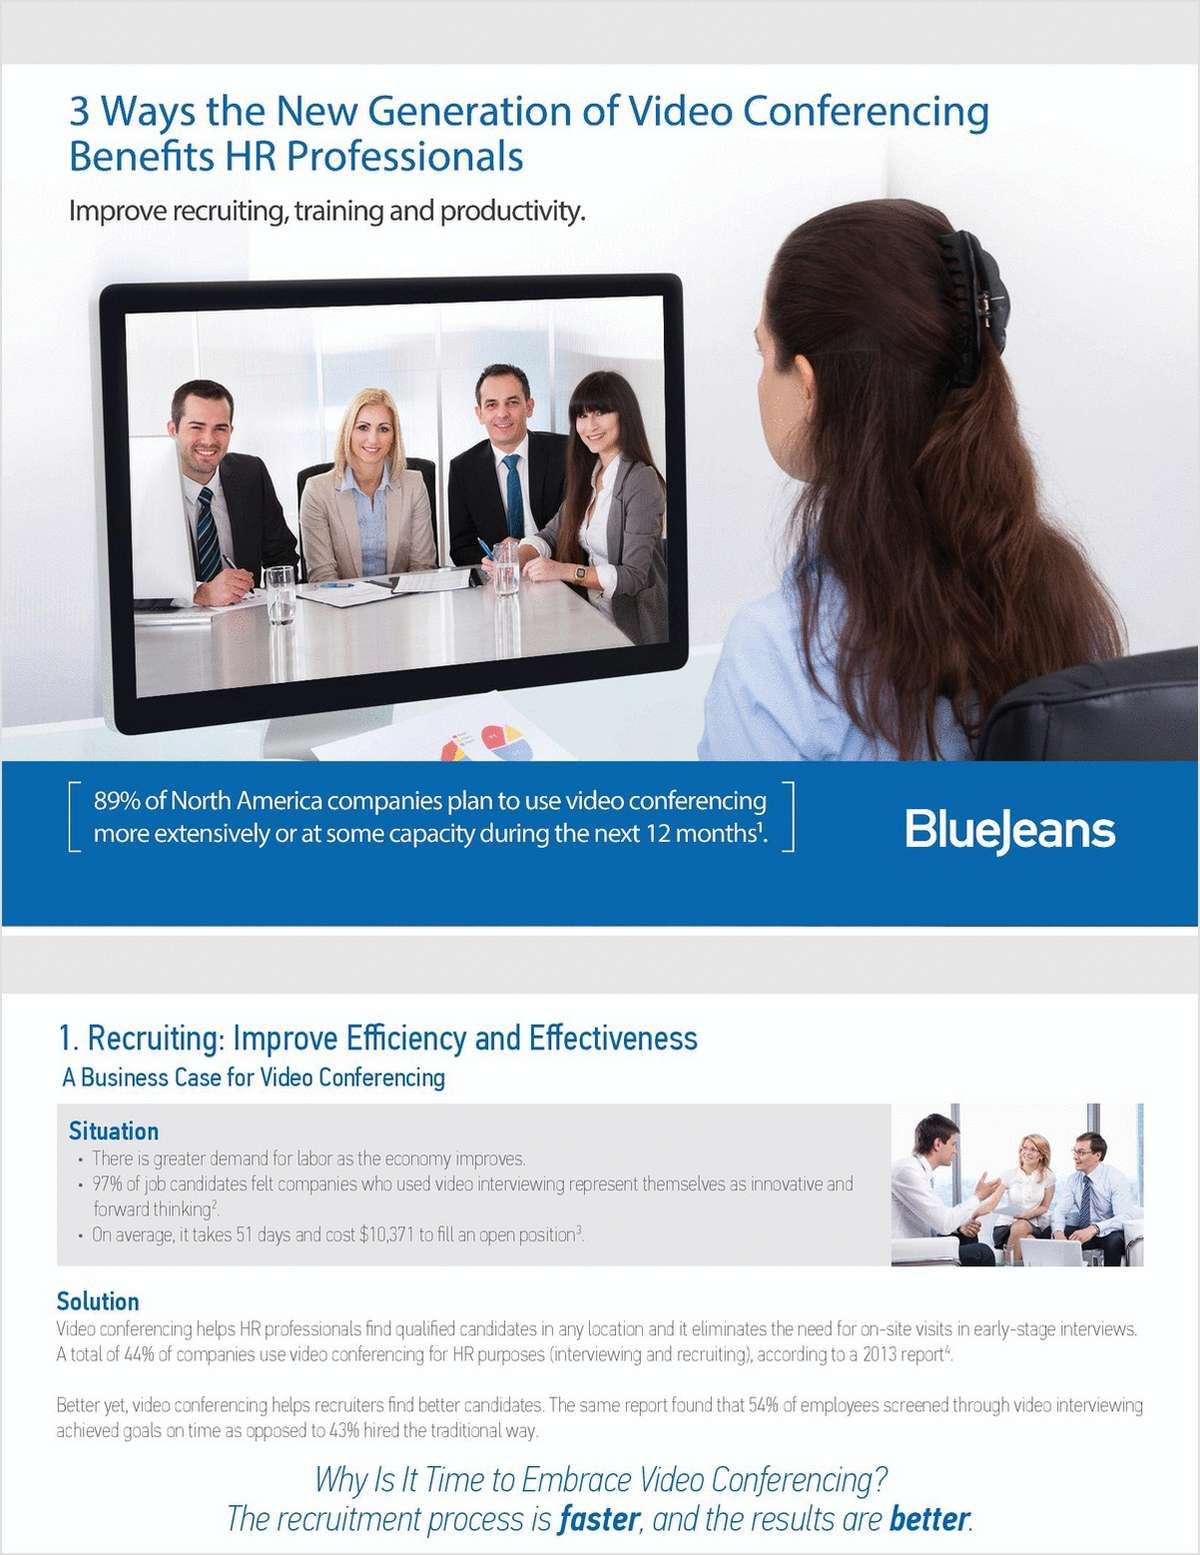 3 Ways the New Generation of Video Conferencing Benefits HR Professionals